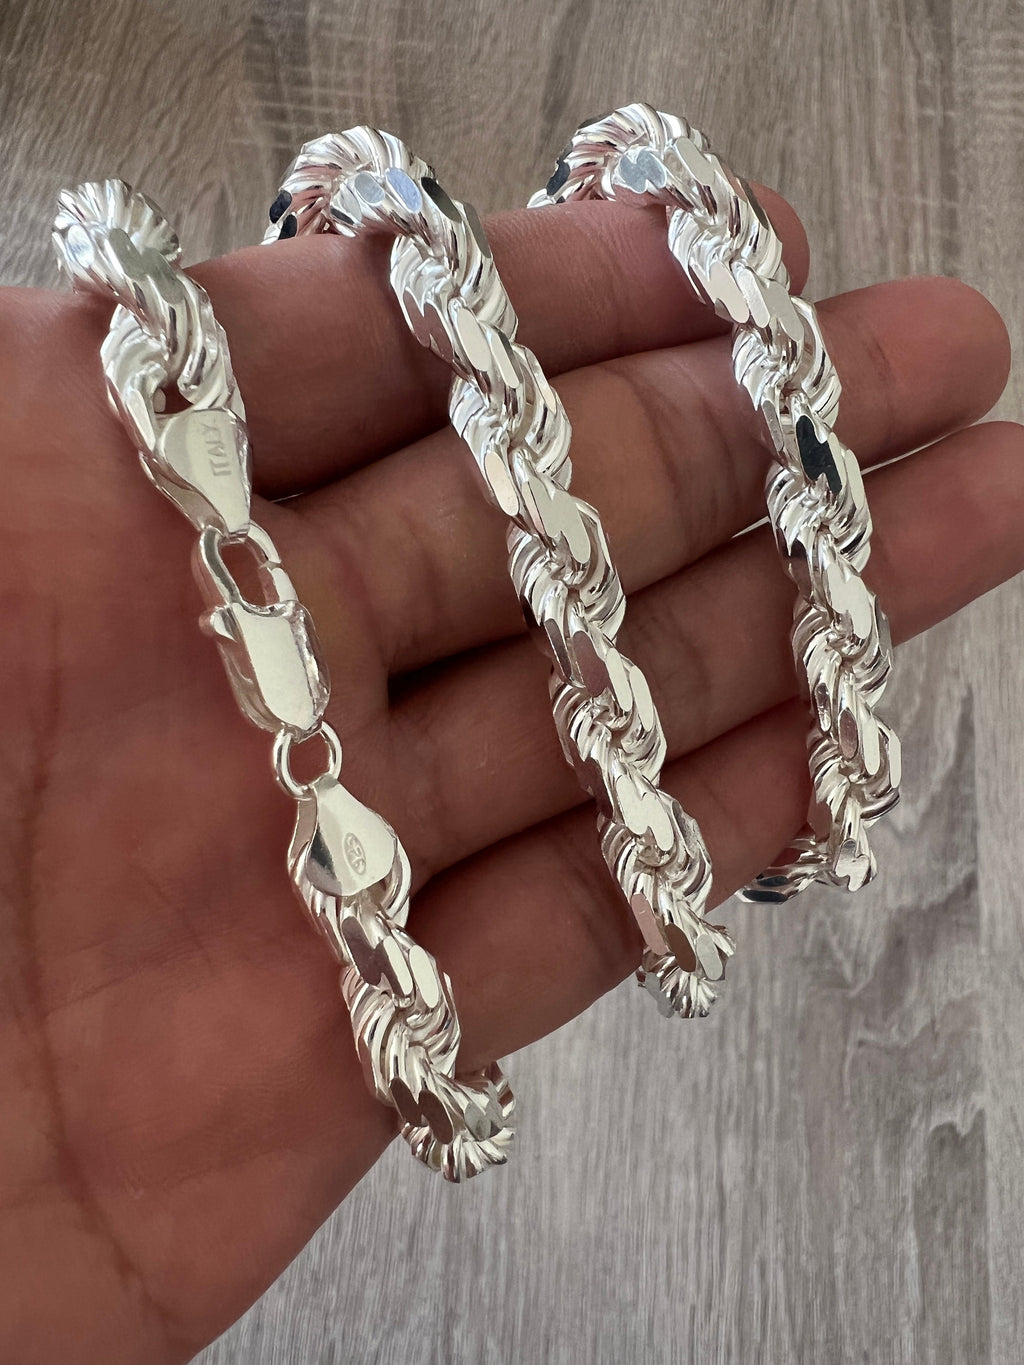 Chain Necklace Chunky Padlock Chain for Men Handmade Silver